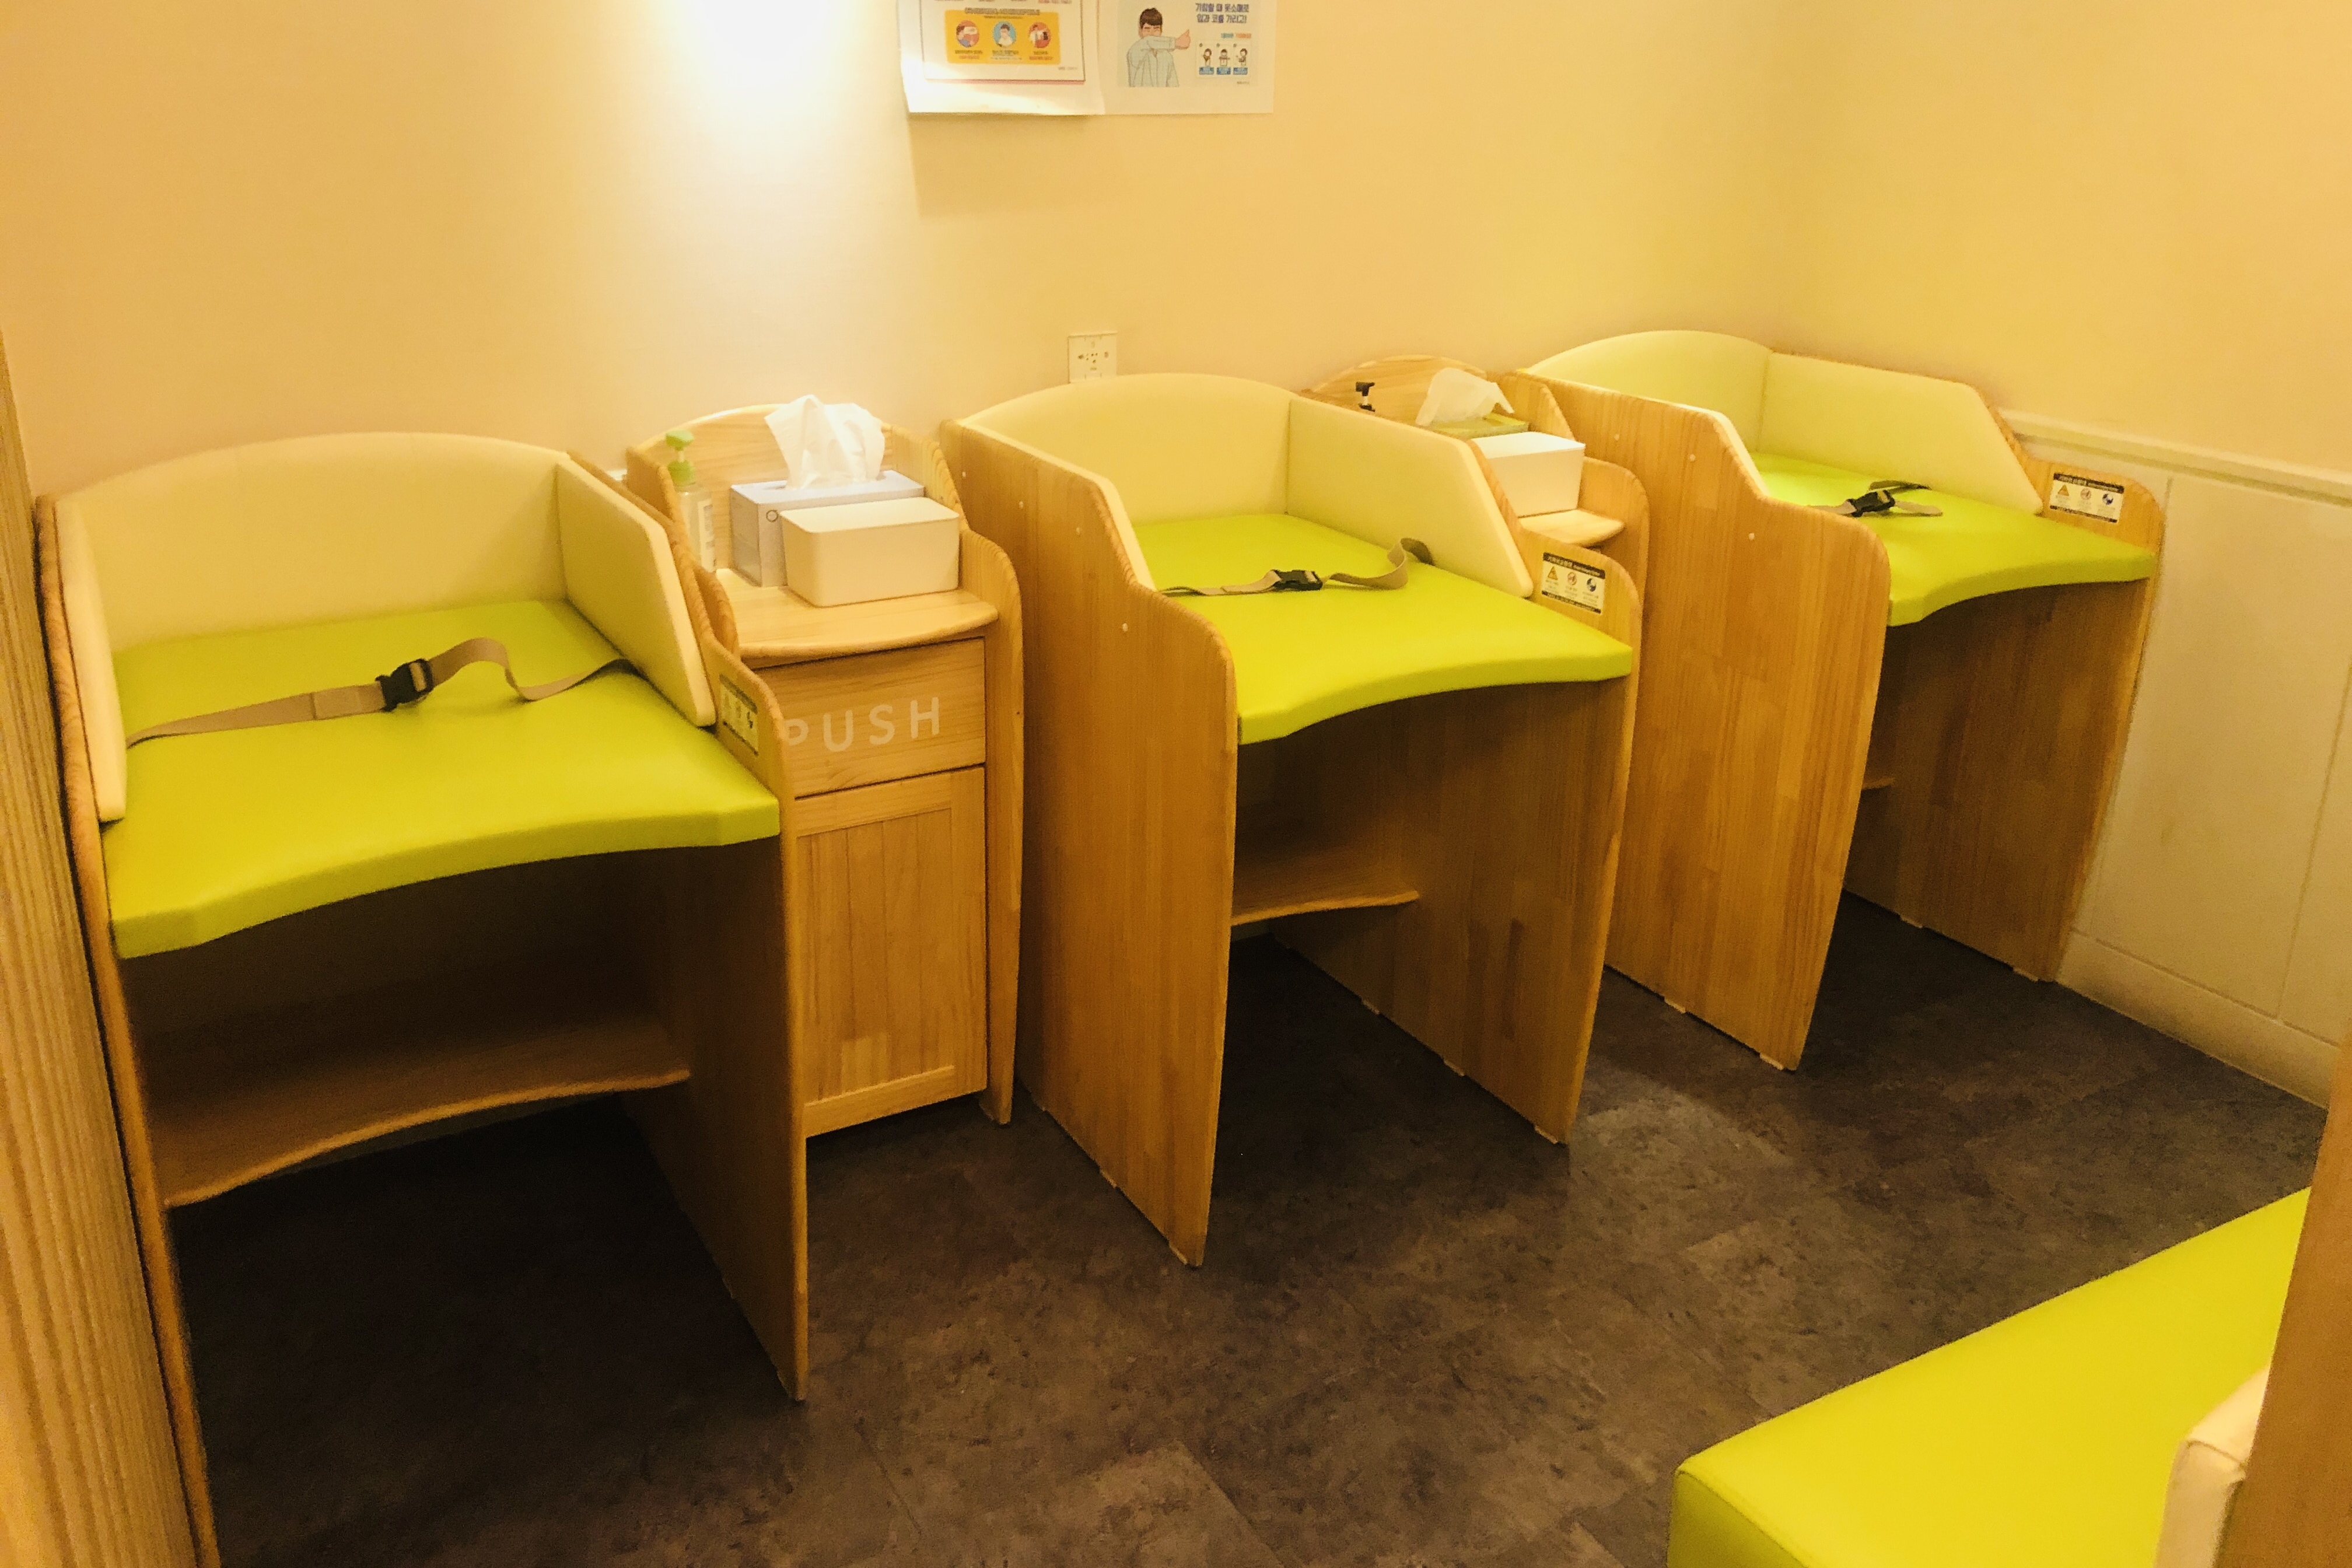 Expecting mother and children resting area0 : Diaper changing stations in the nursing room
